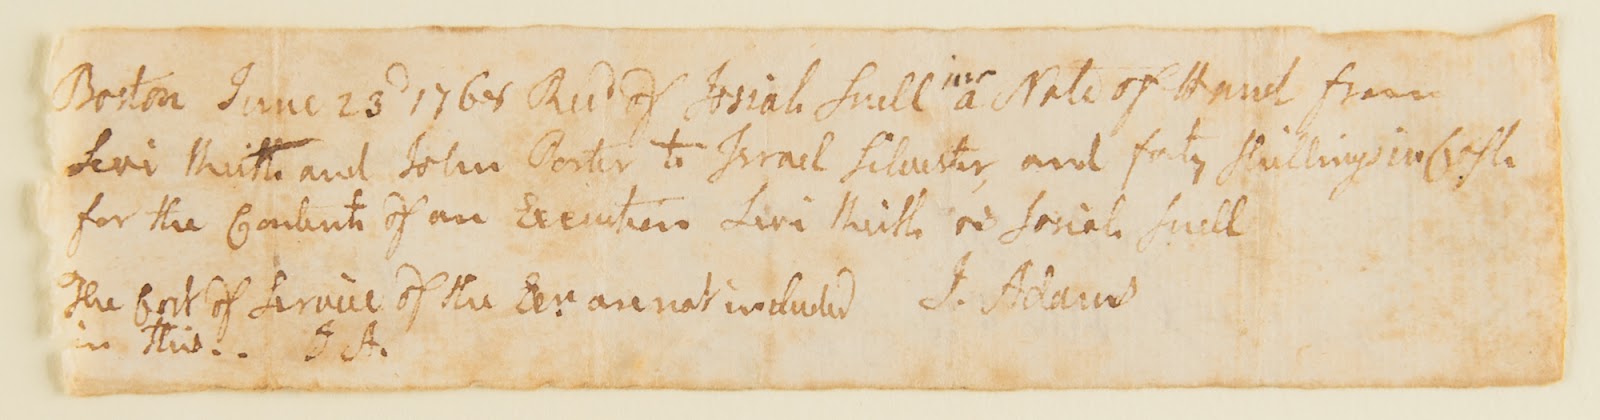 Document signed, “John Adams,” which in part reads, “Rec'd of Josiah Suell a Note of Hand from Levi Keith and John Porter to Israel Silvester, and forty shillings.” Adams also writes his initials in the lower left corner, “J.A.”